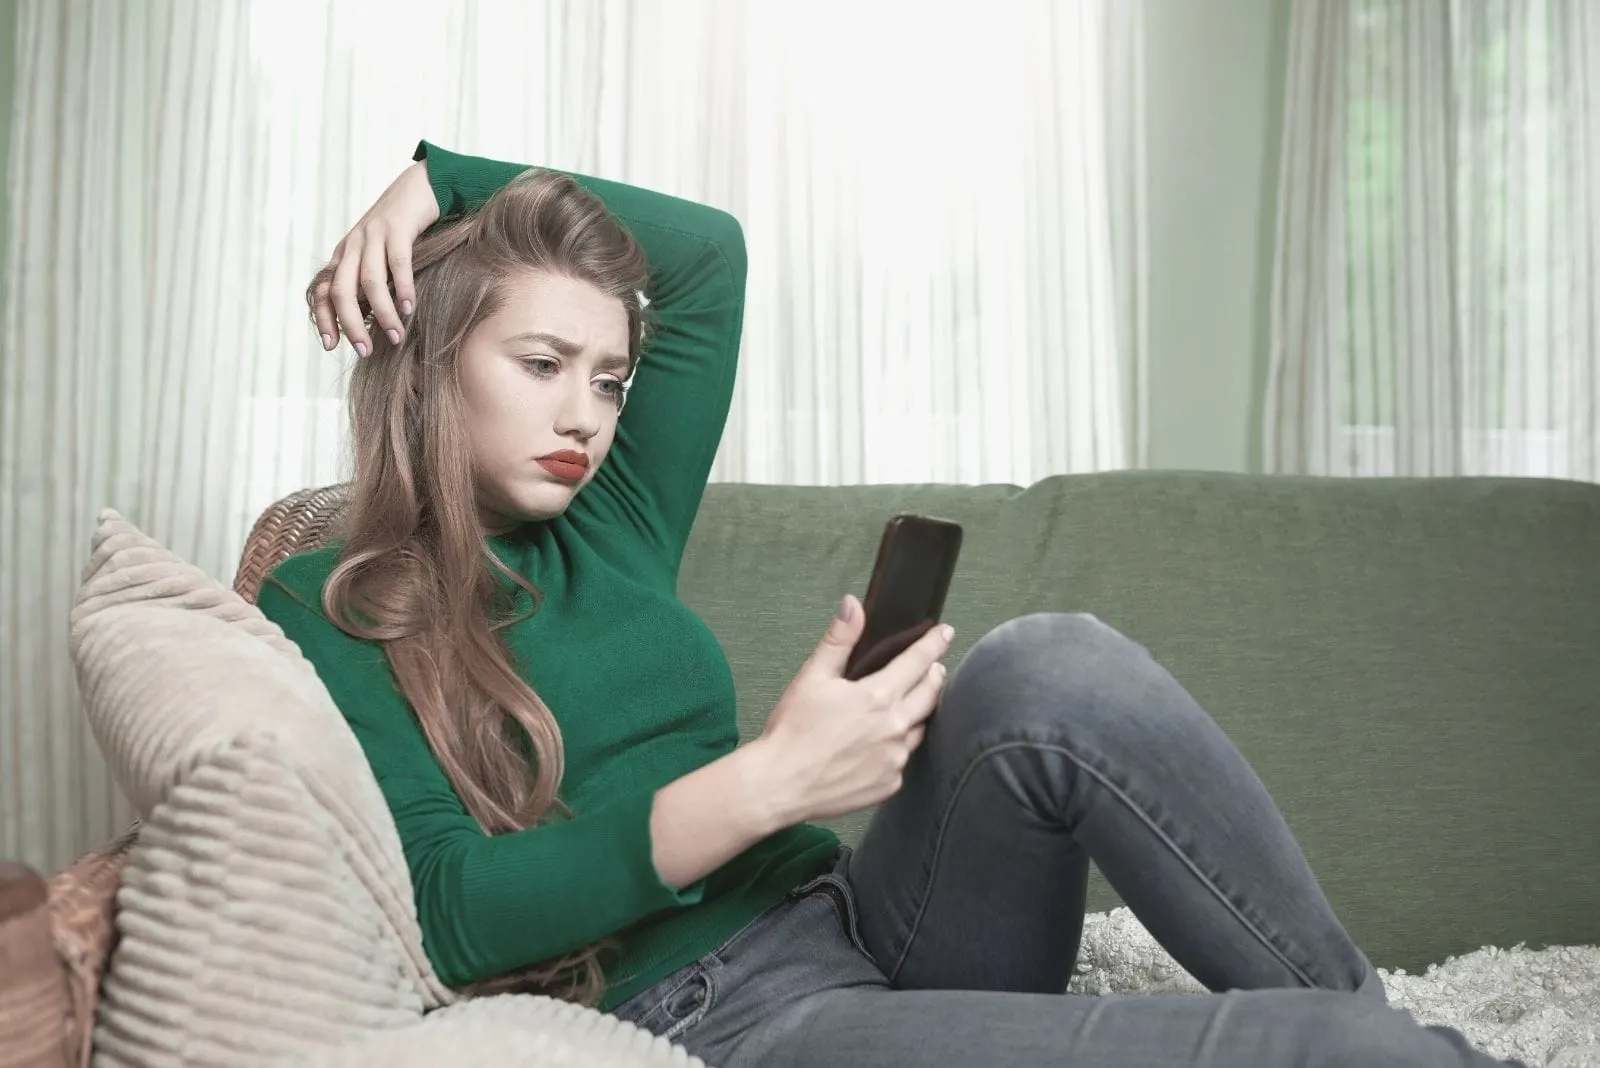 worried woman with her phone sitting on the couch putting her other arm on her head